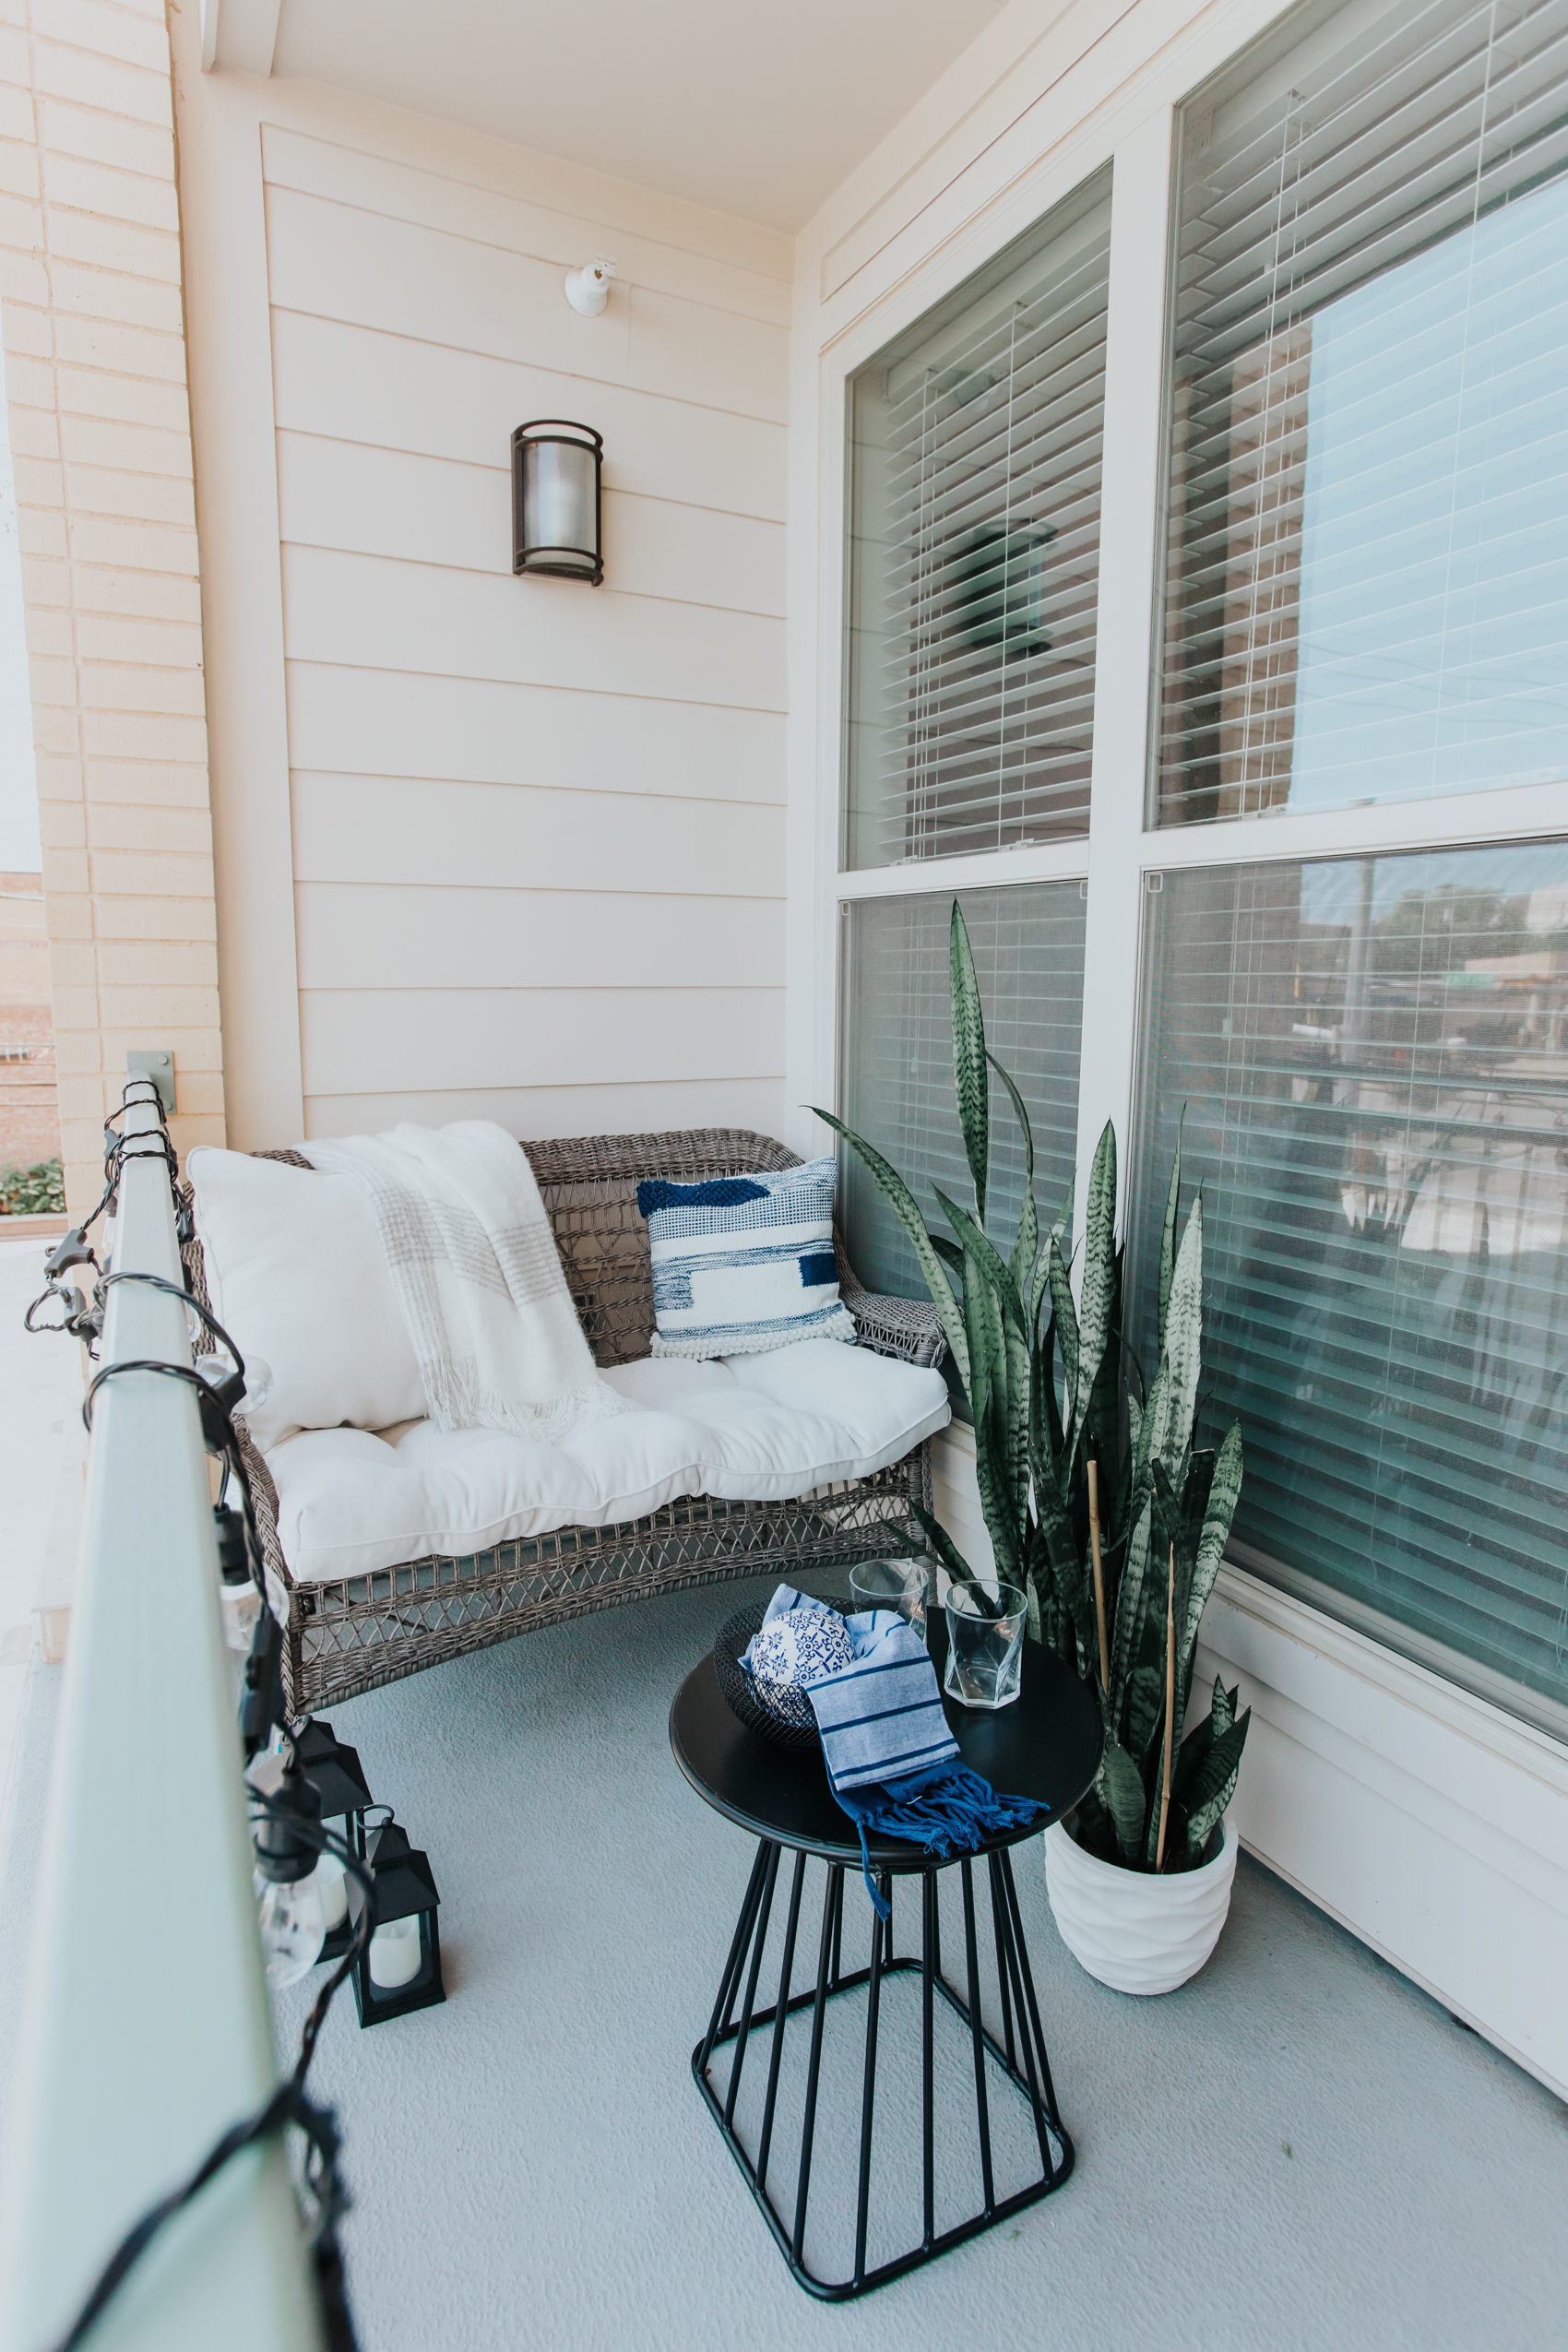 Apartment patio ideas with a gray wicker sofa, metal coffee table, snake plant, throw pillows and more on a budget